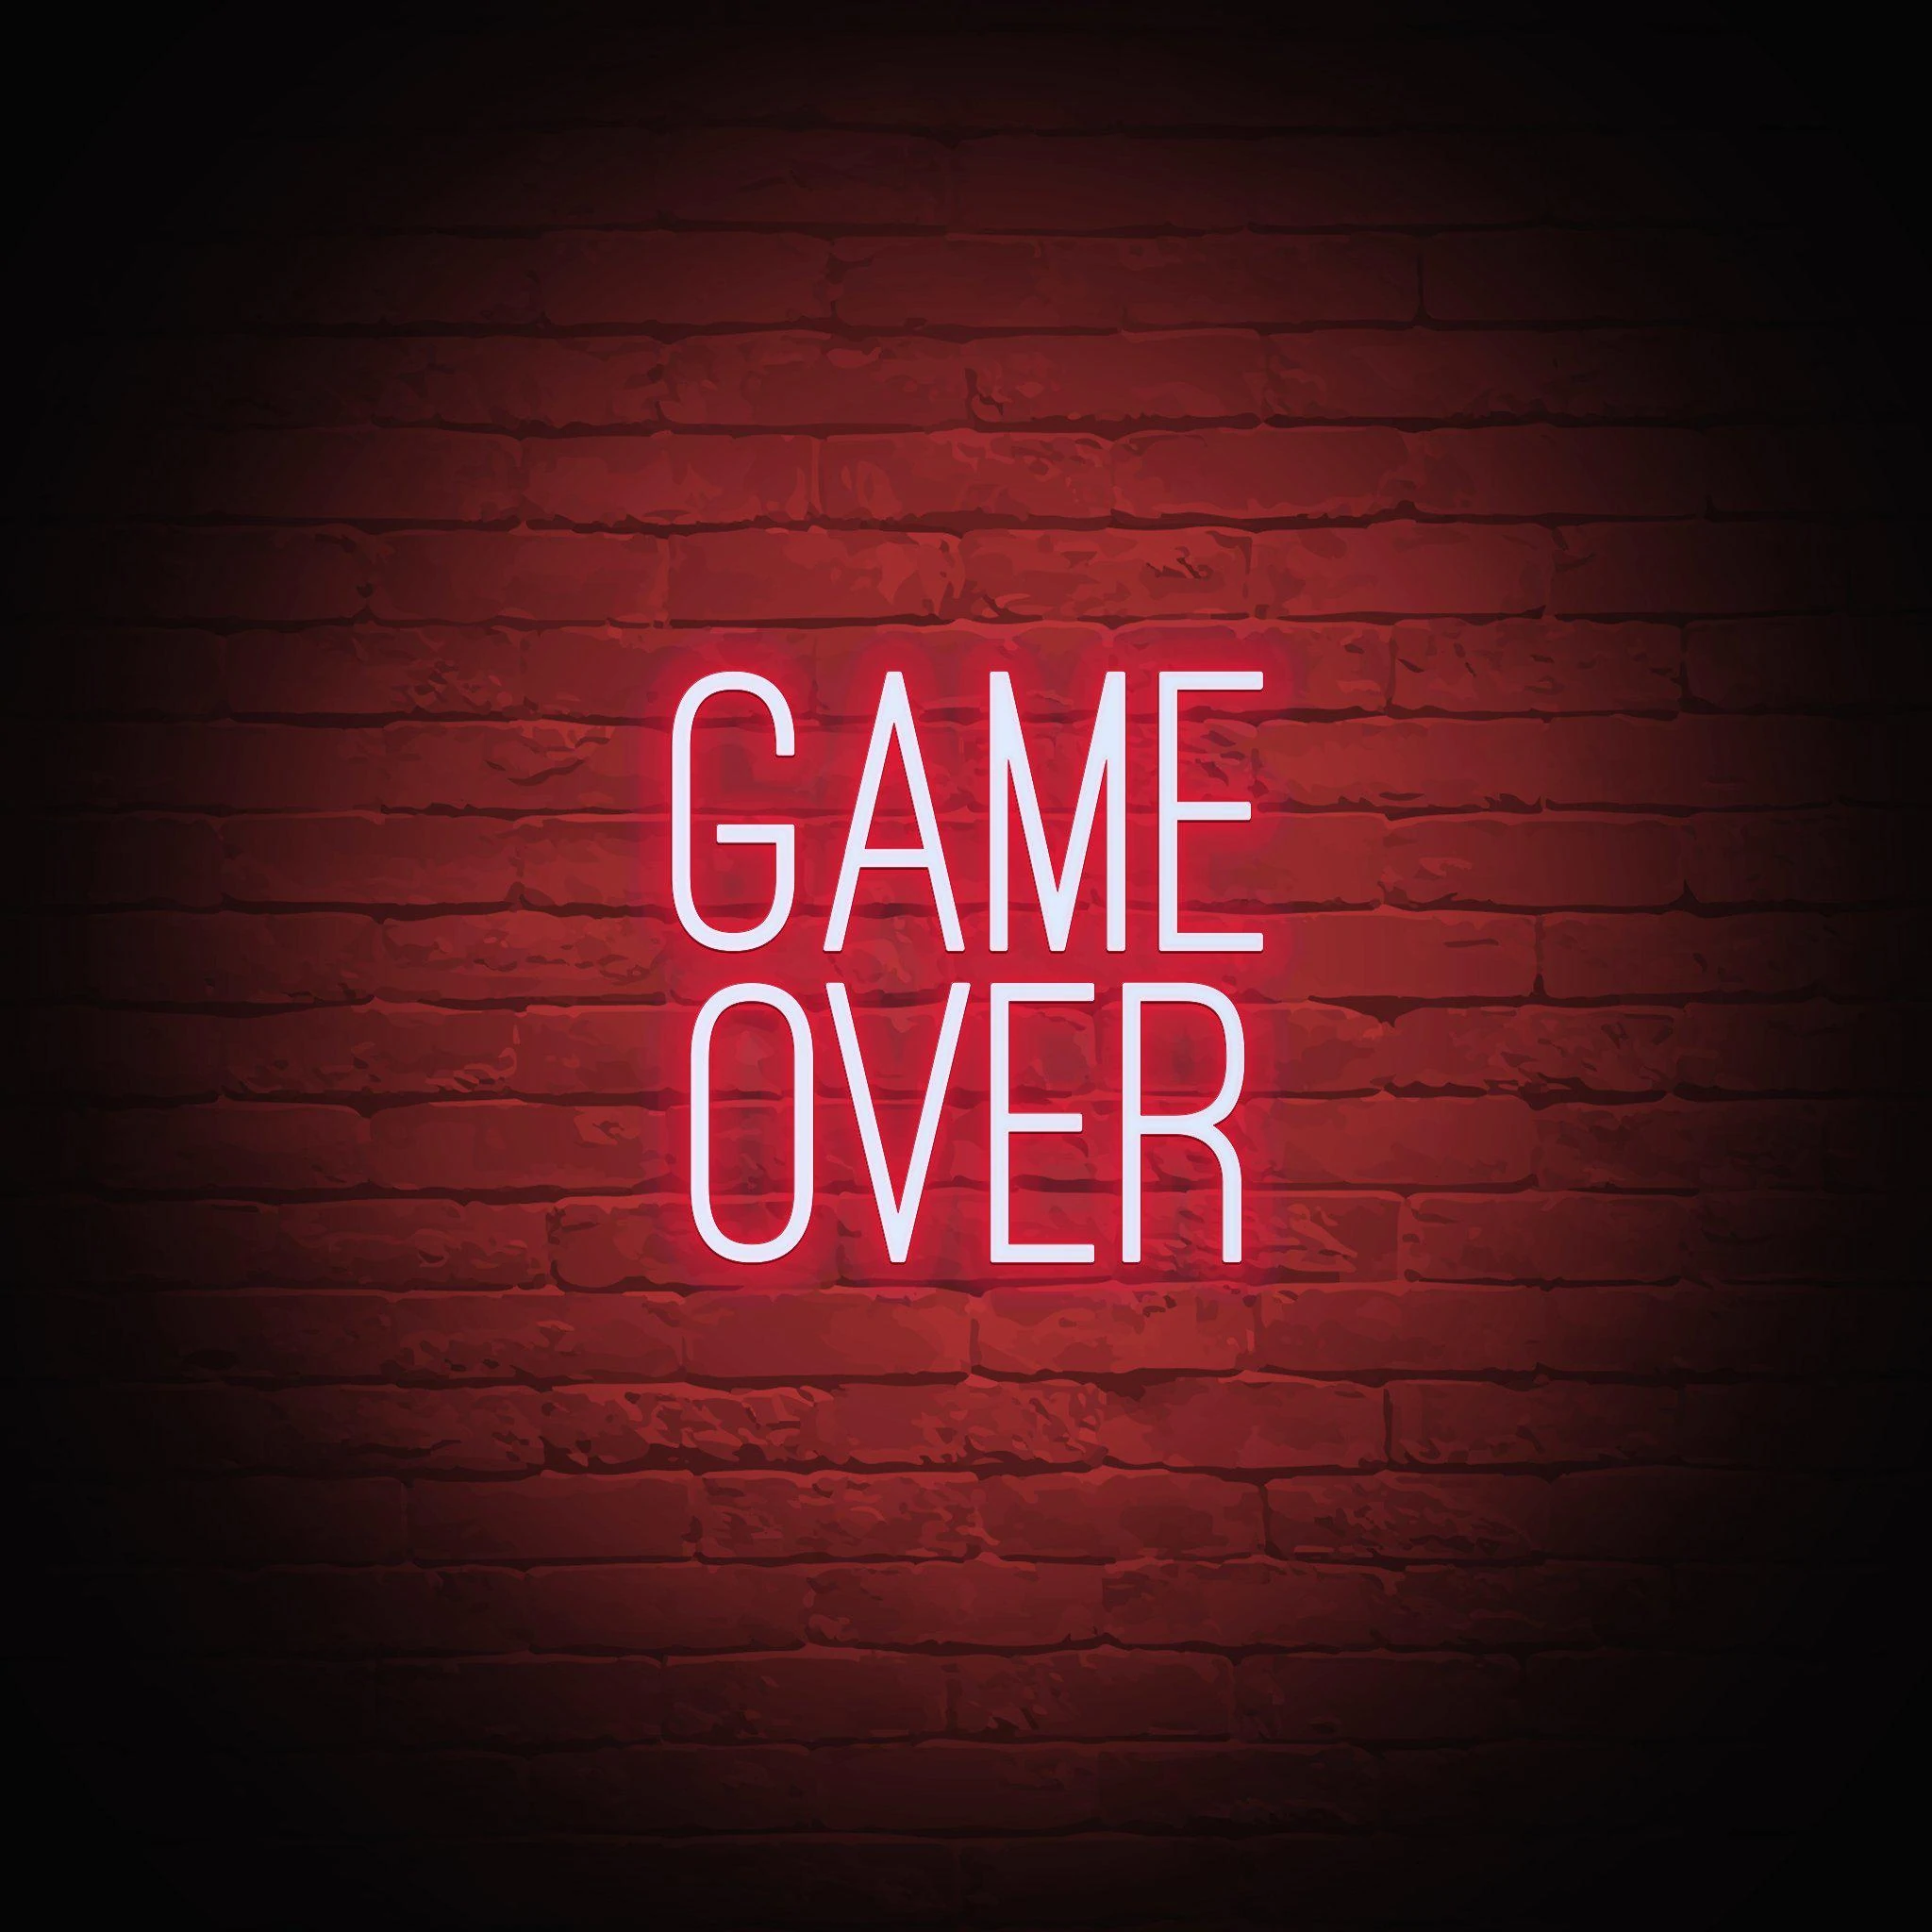 'GAME OVER' NEON SIGN